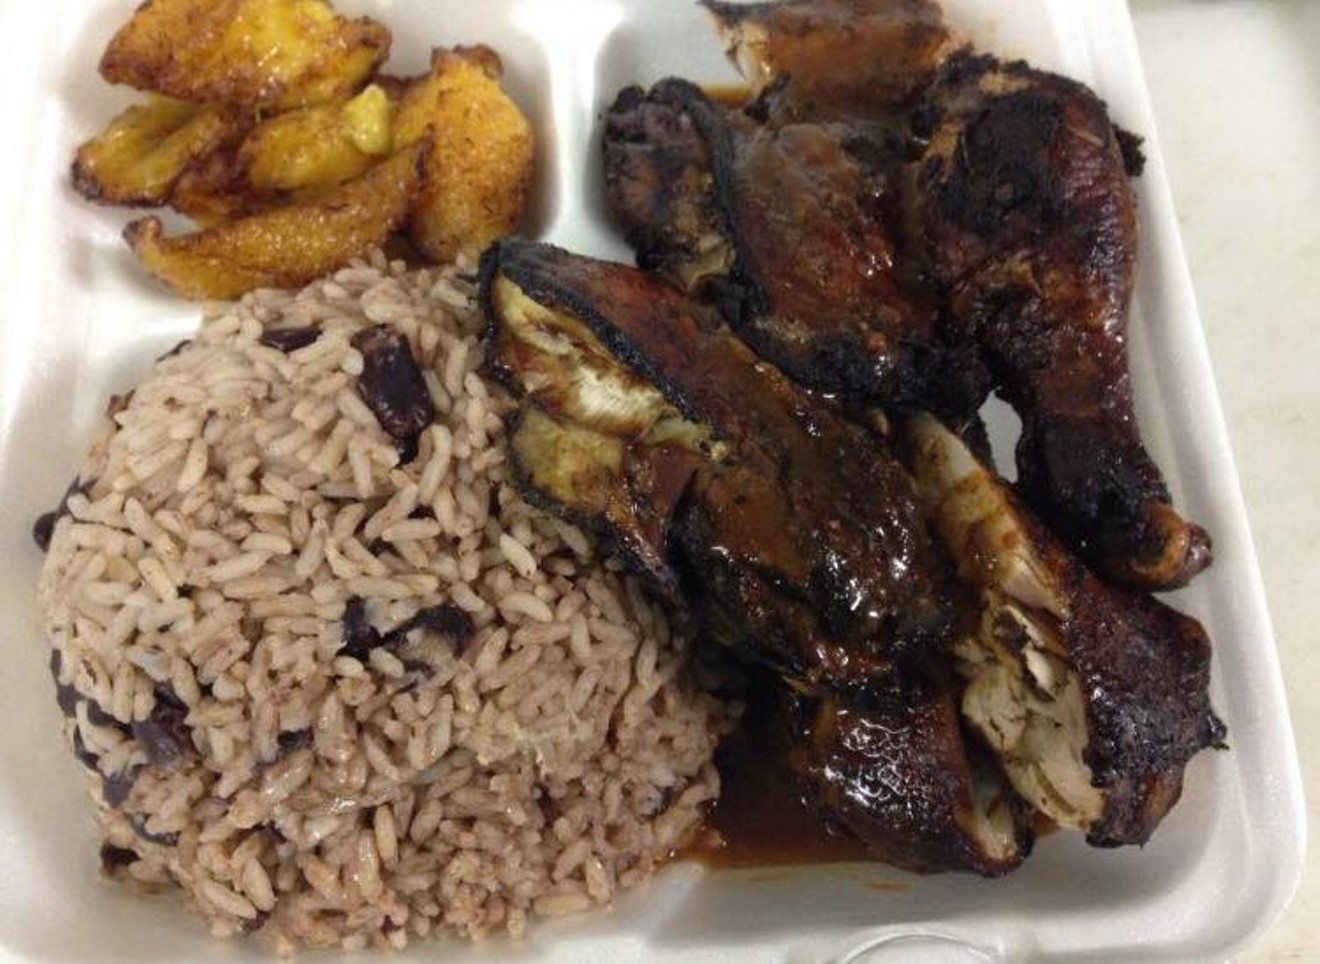 Jerk chicken with rice and plantains, one of several Jamaican dishes you'll find on the menu at One Love Lounge.